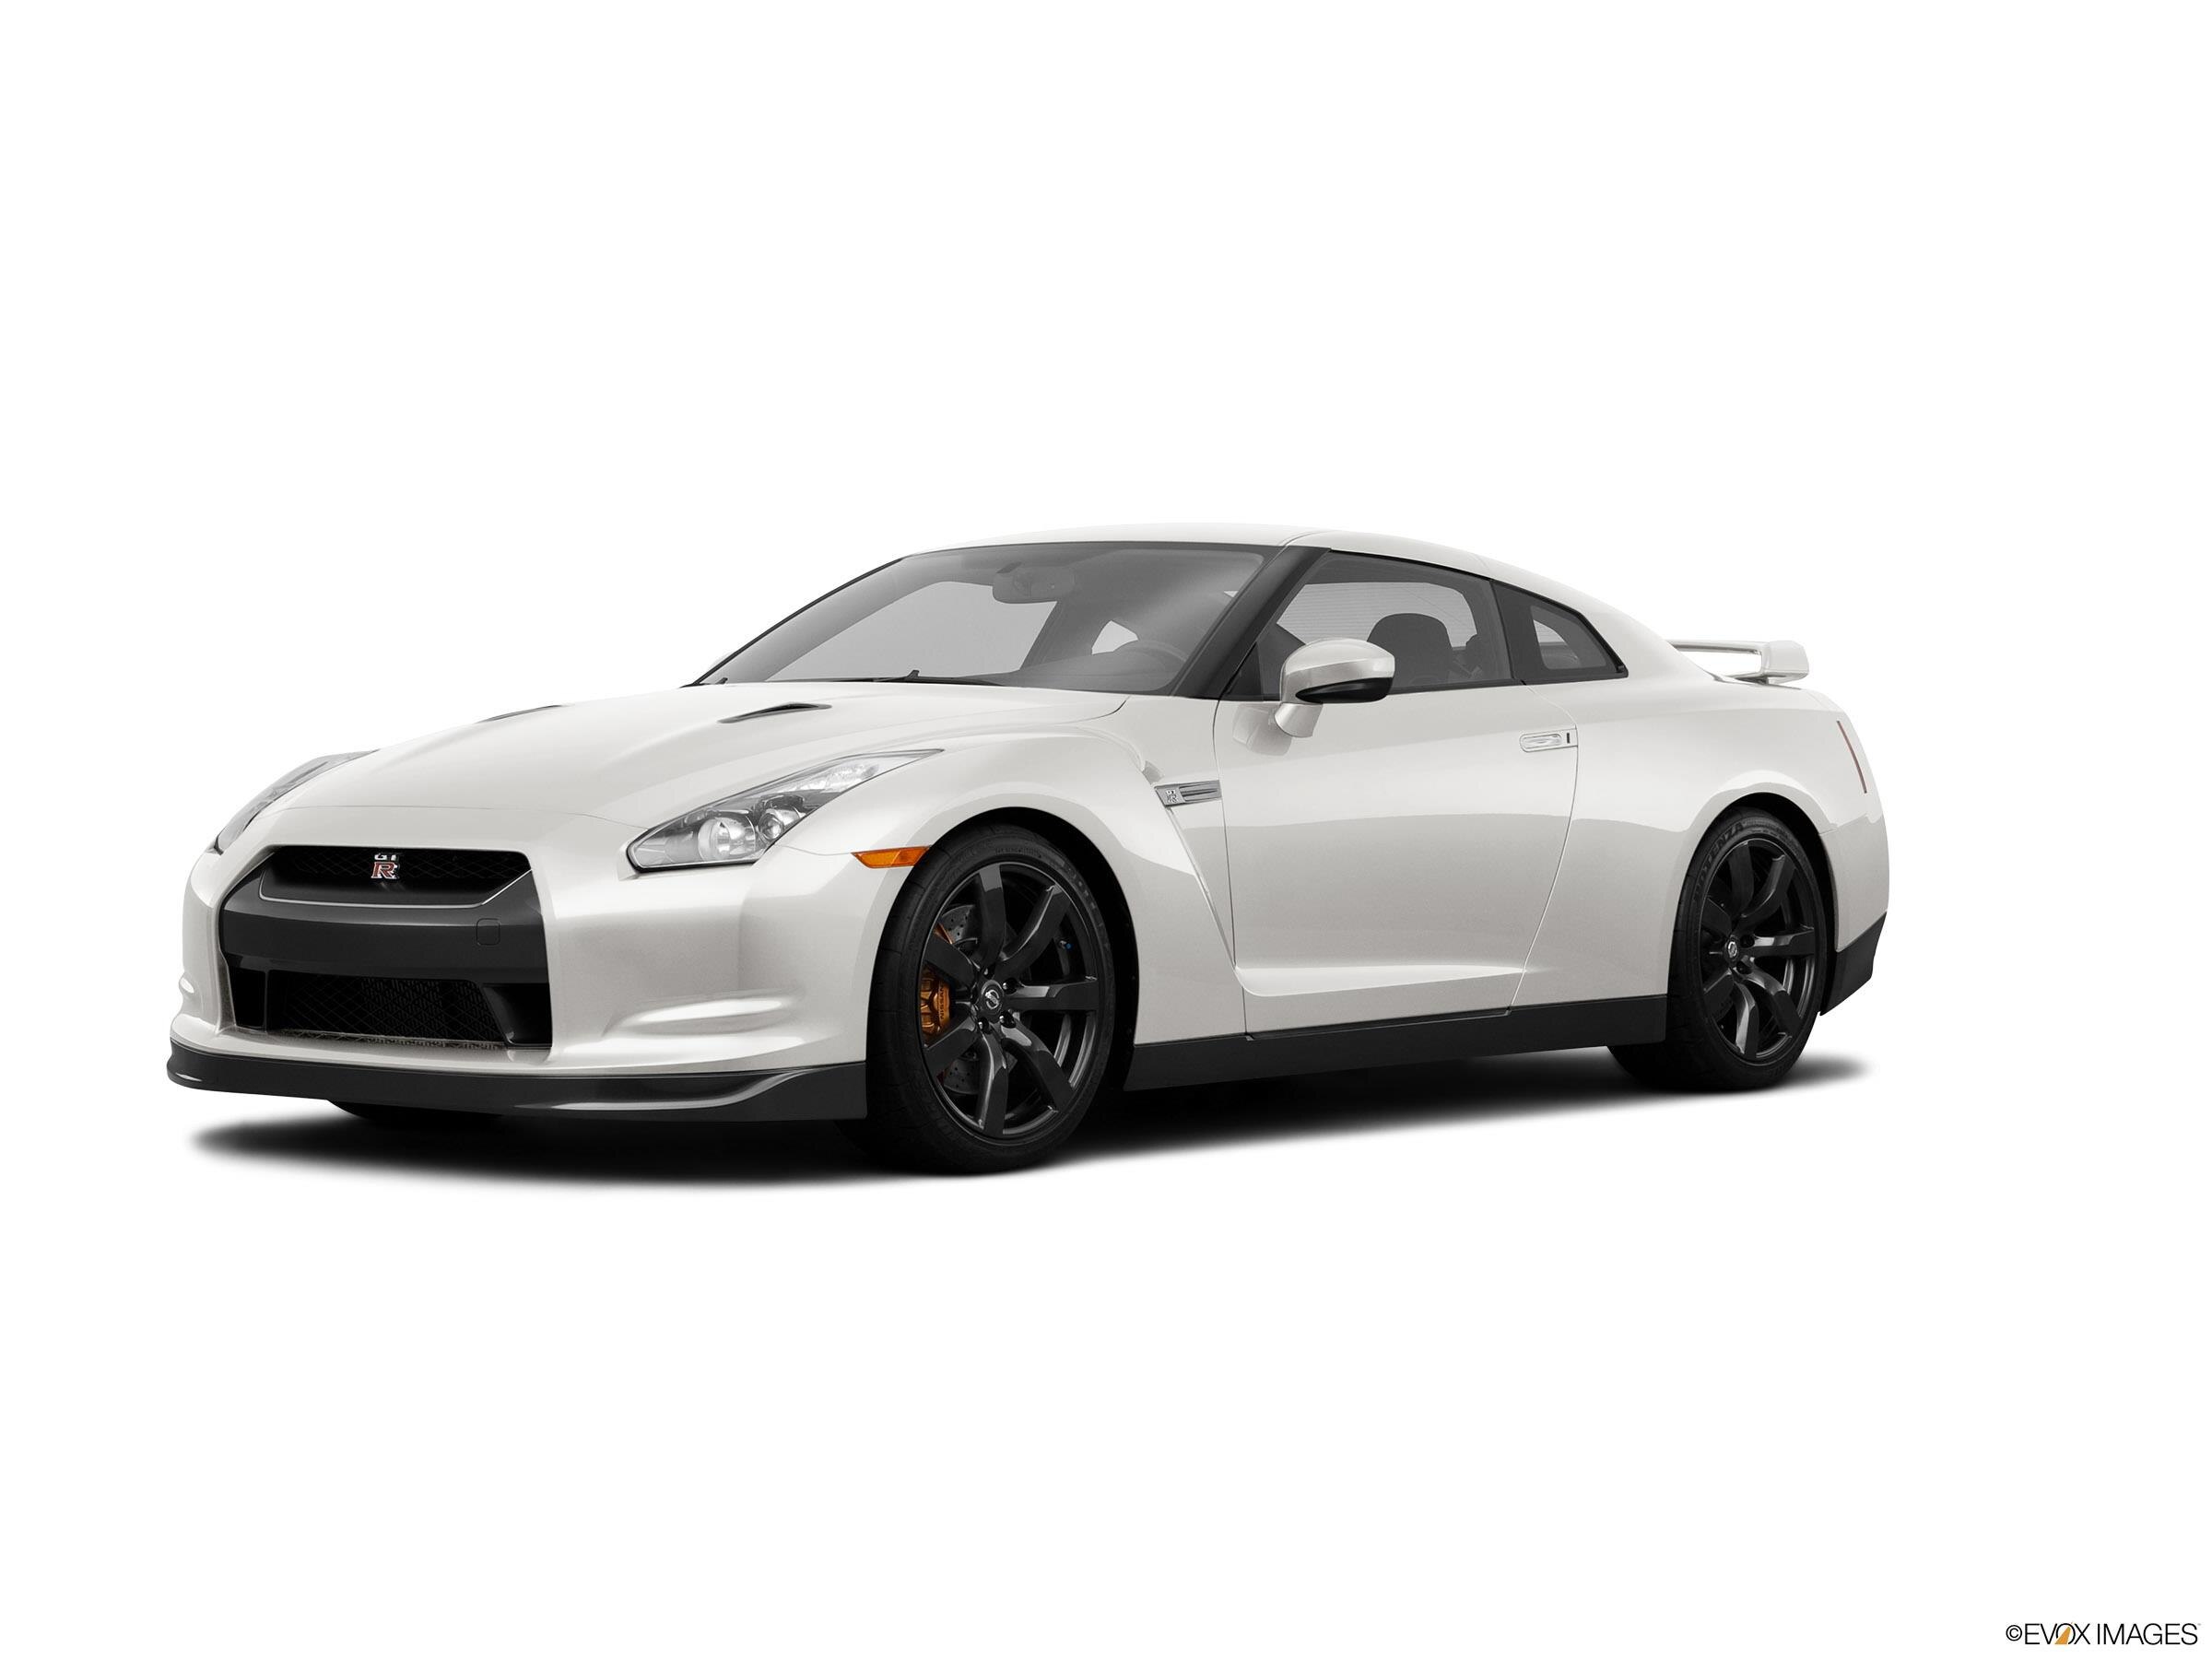 2011 Nissan GT-R Research, Photos, Specs and Expertise | CarMax